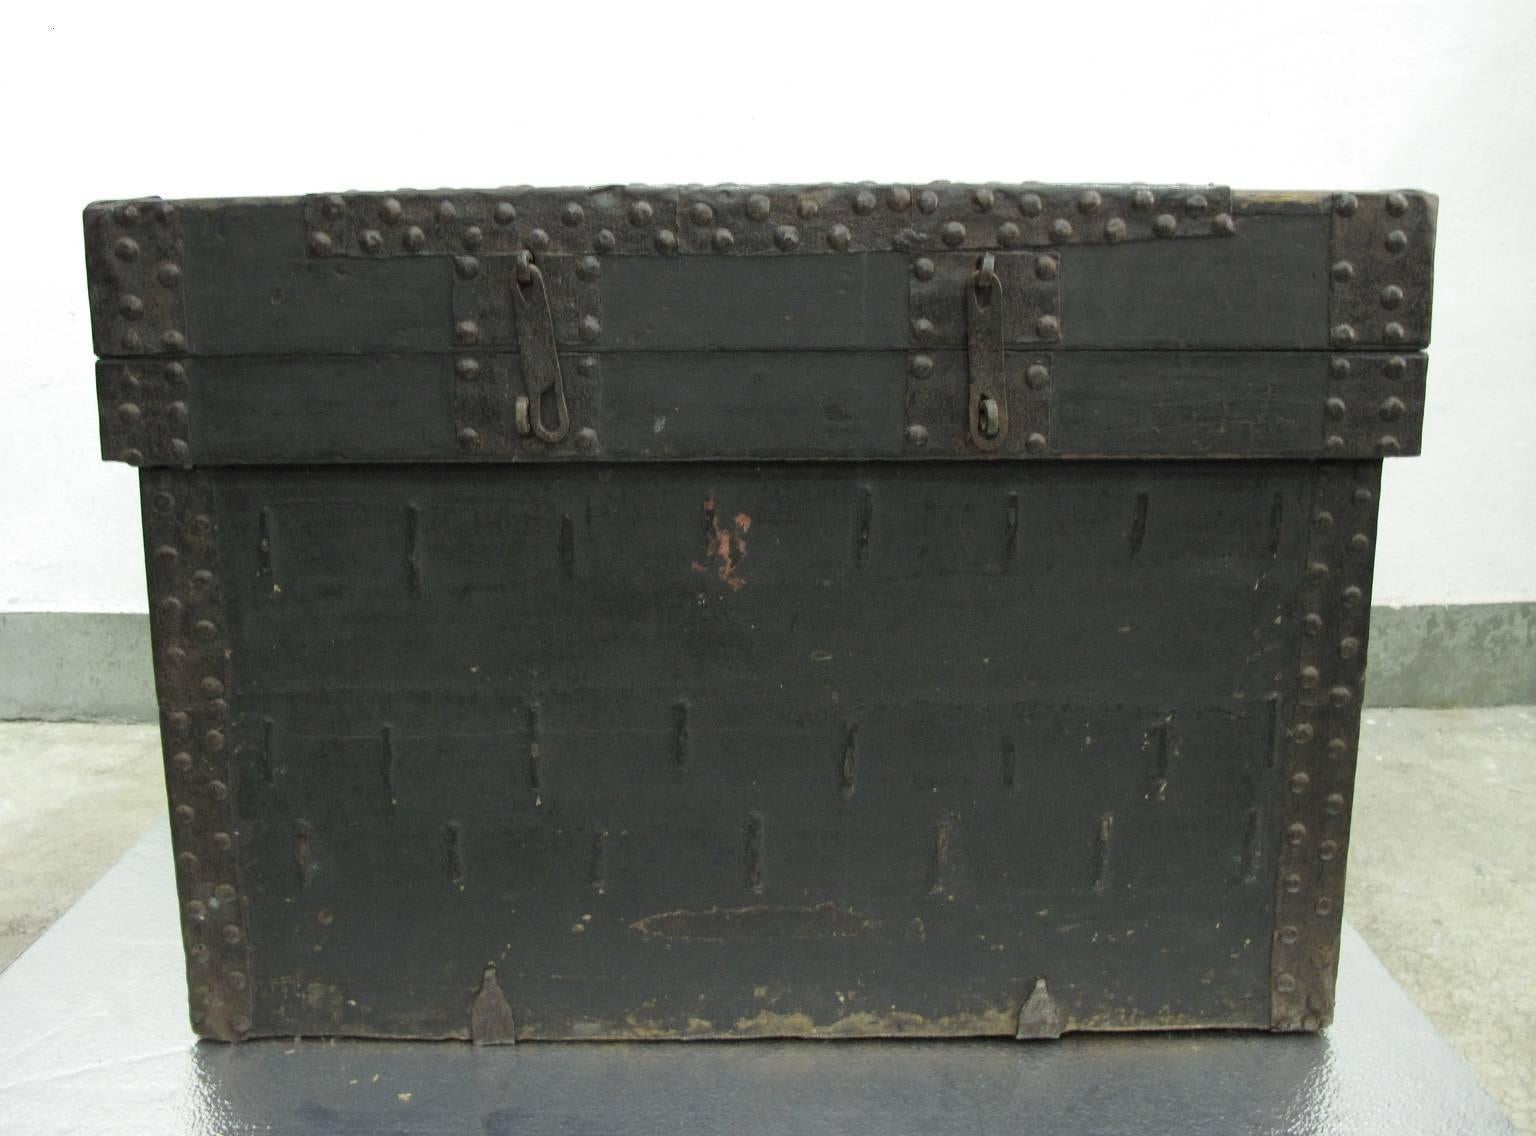 A large black lacquer money chest with original metal ware, from Shanxi Province, China, late 17th century-early 18th century.